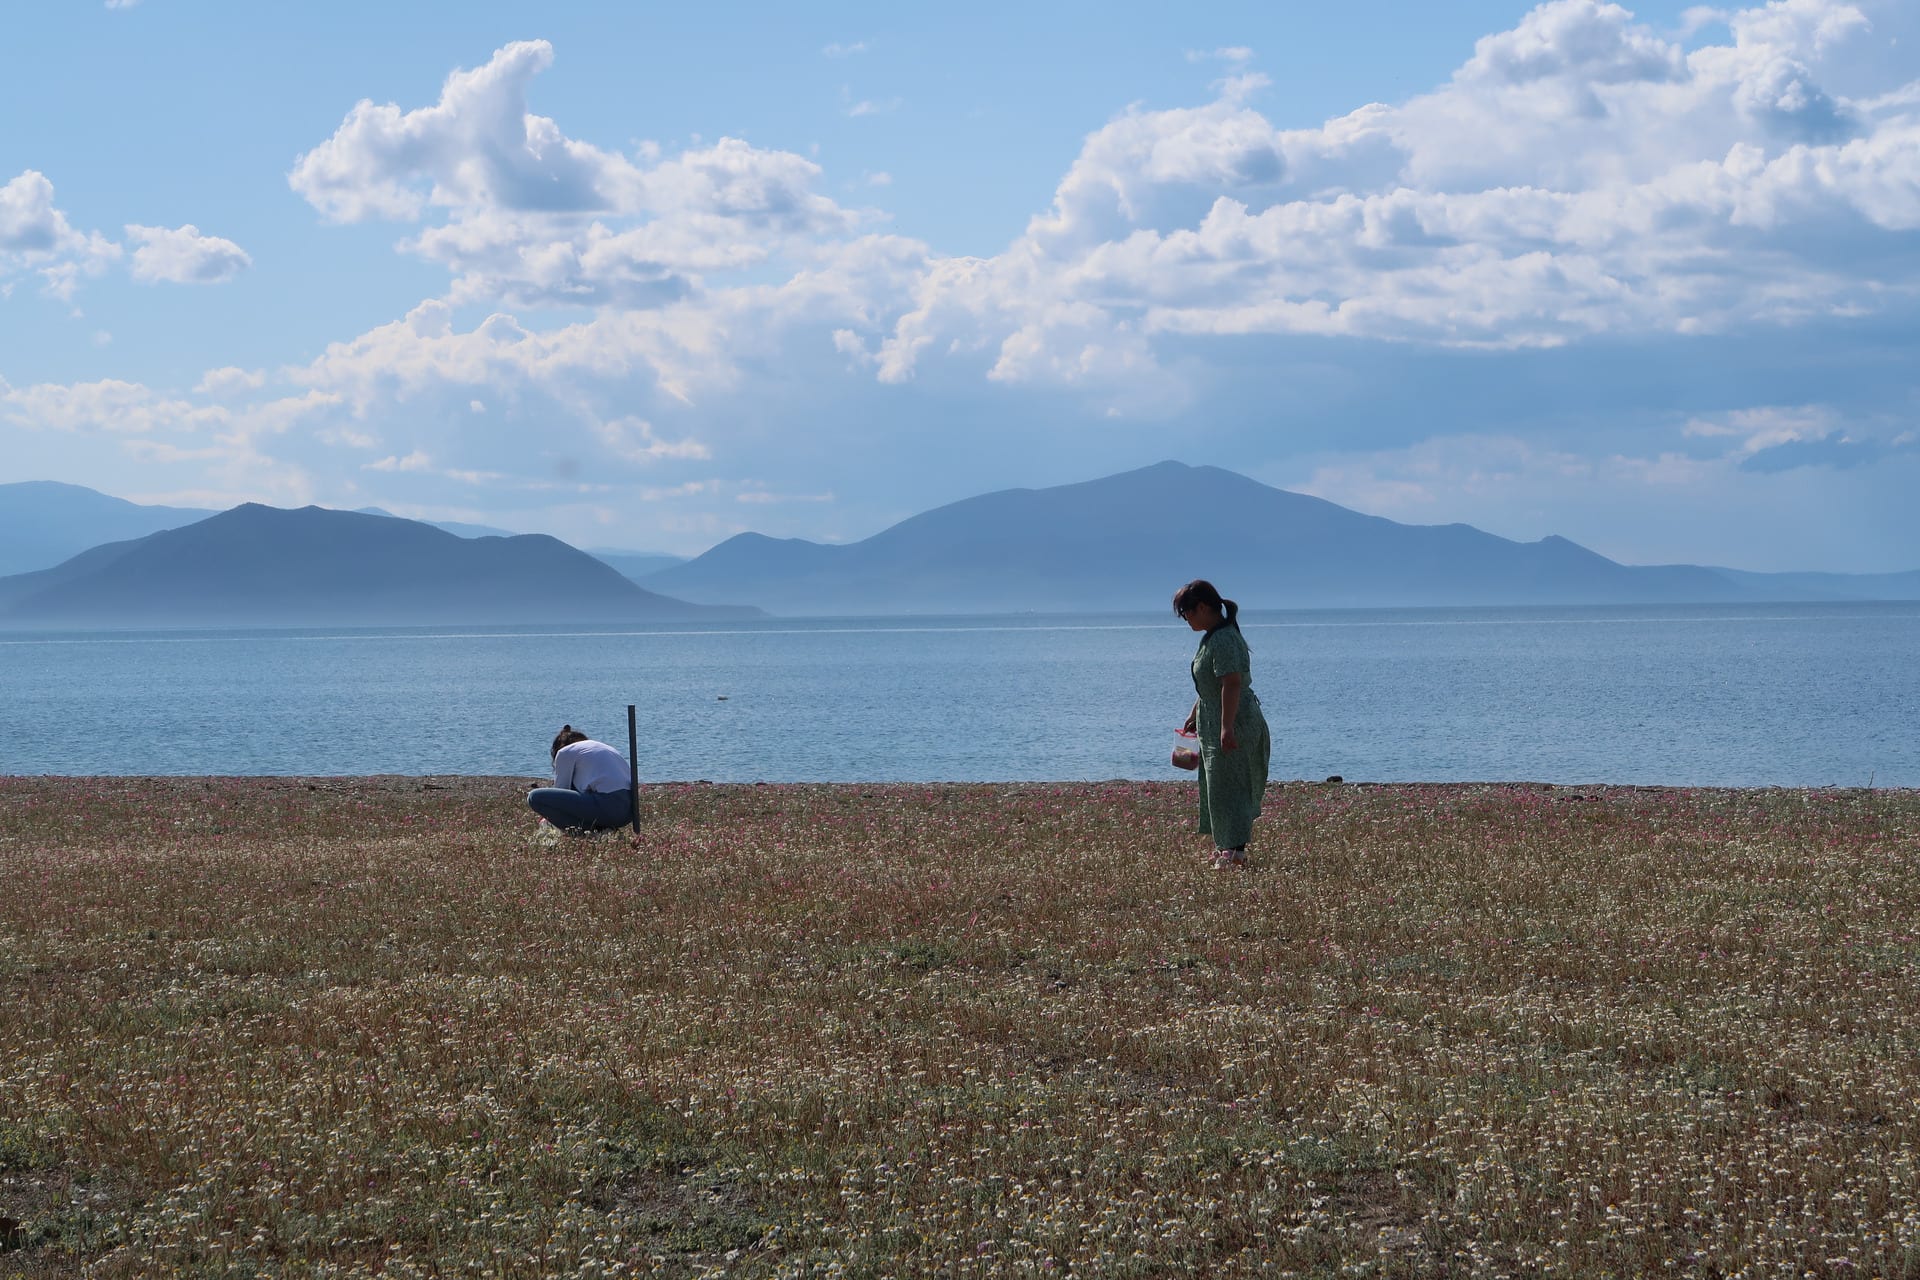 Two figures shown collecting samples in a field of chamomile flowers.